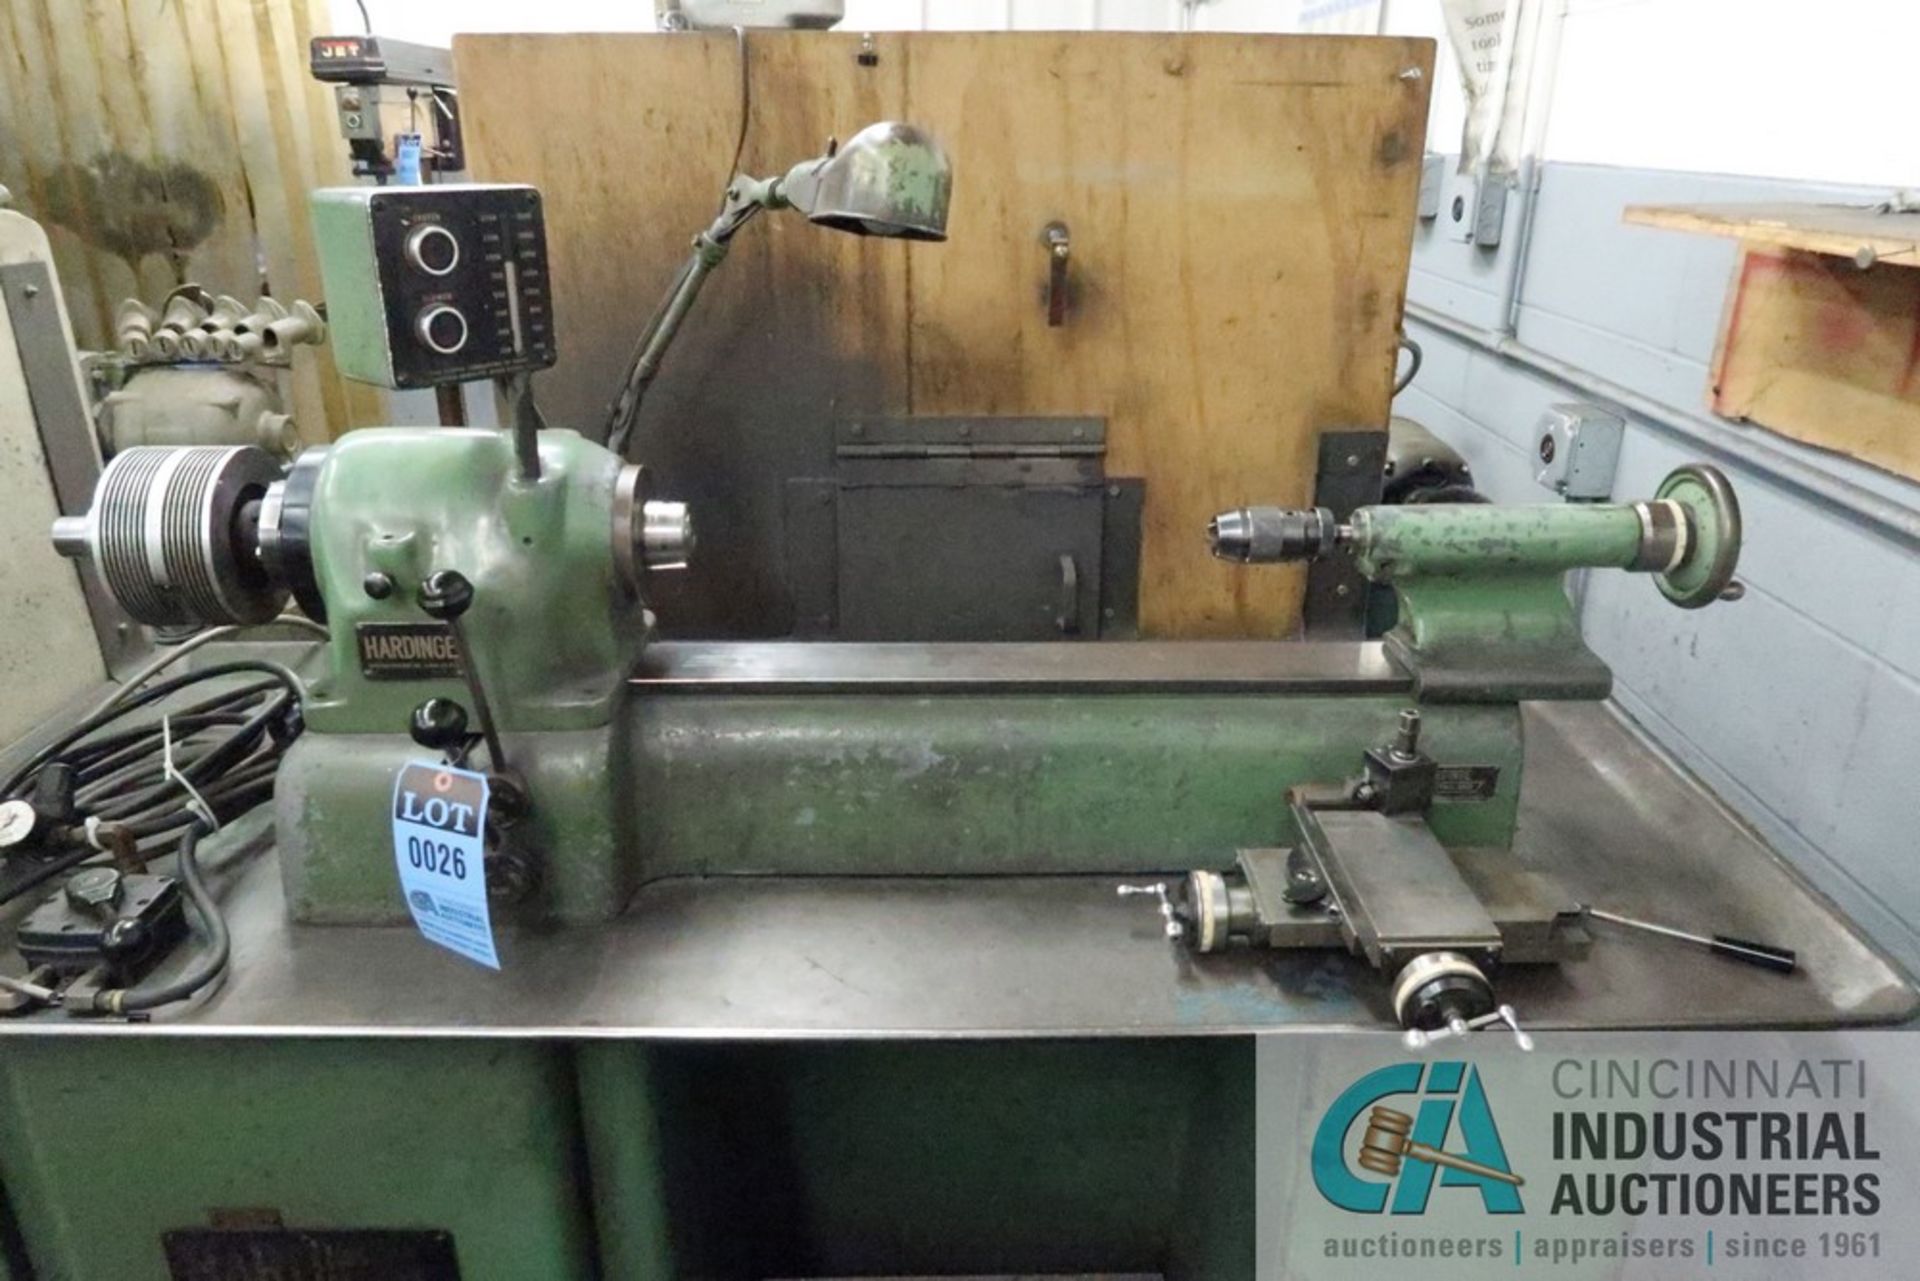 9" X 20" HARDINGE DV-59 DOVETAIL BED PRECISION LATHE; S/N N/A, COLLET CHUCK, 1-1/4" THROUGH HOLE, - Image 2 of 9